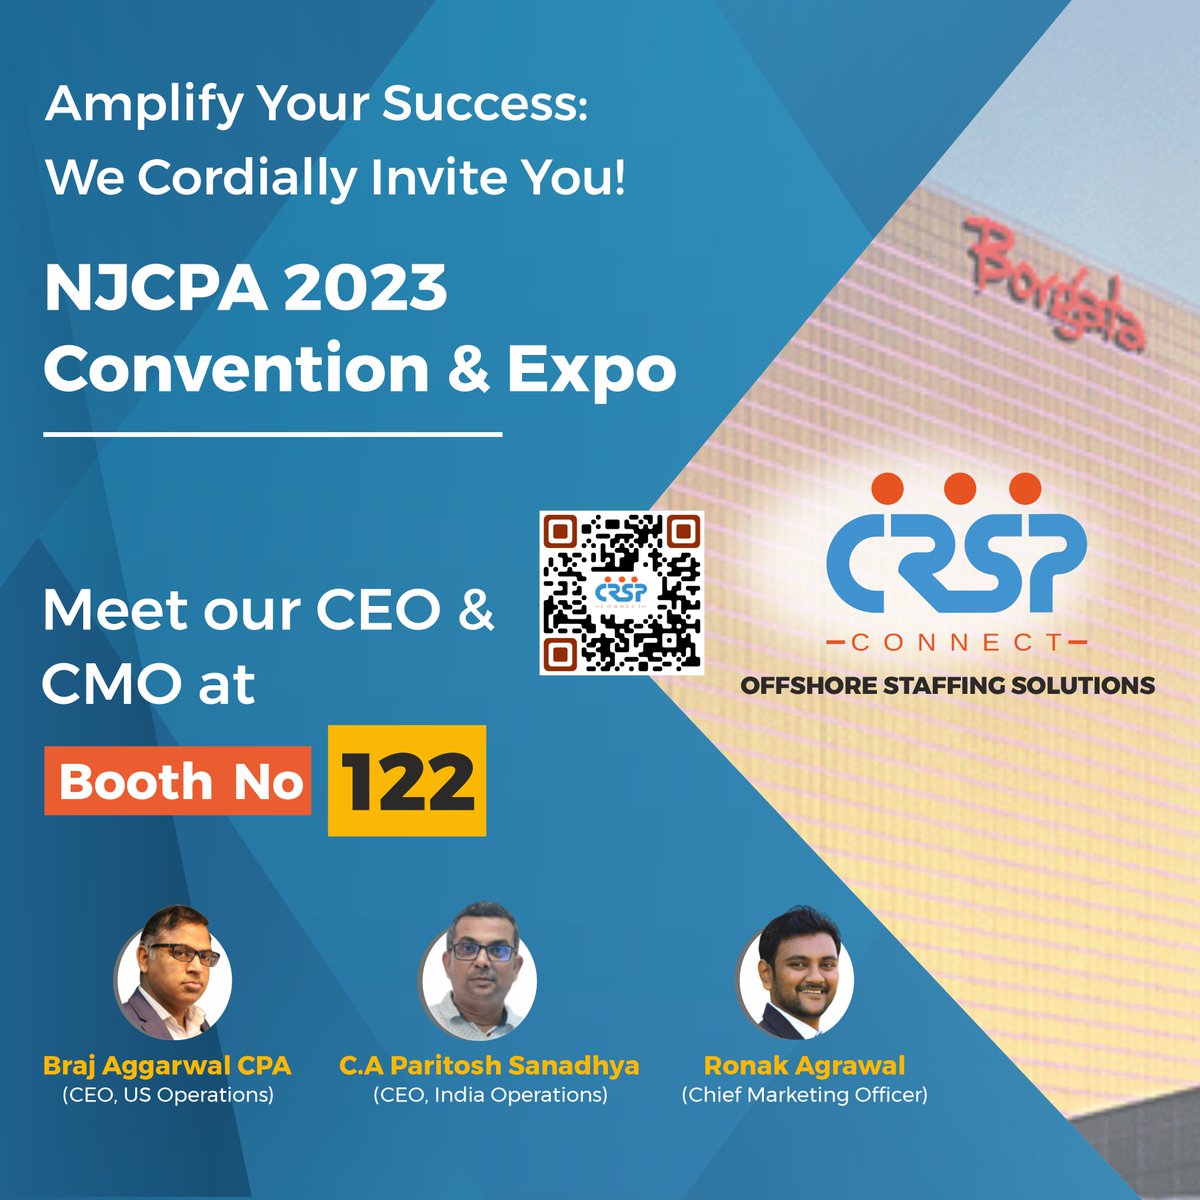 Join us at this premier accounting event where industry leaders gather to share knowledge and ignite innovation. Visit our booth 122 to meet our CEO - CA Paritosh Sanadhya, CPA Braj Aggarwal, and CMO Ronak Agrawal. 
Visit us at Booth - 122
#njcpa #njcpa23 #accountingevent #uscpa